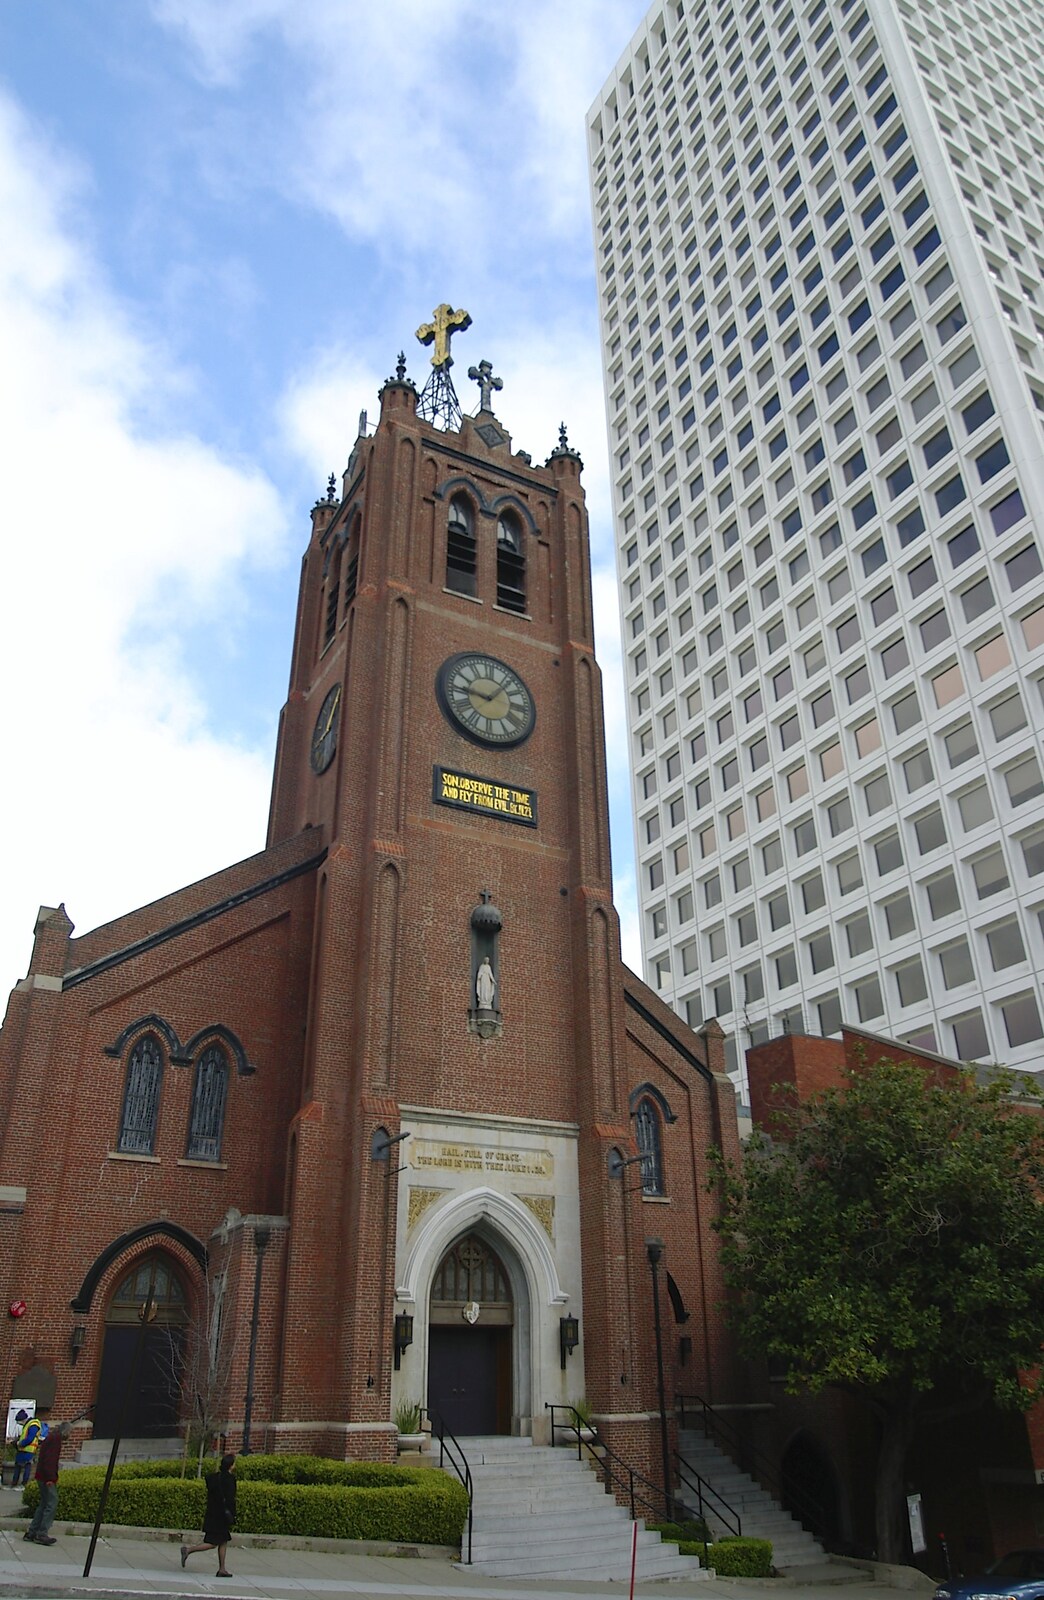 A church, intimidated by an adjacent office block from Chinatown, Telegraph Hill and Fisherman's Wharf, San Francisco, California, US - 11th March 2006